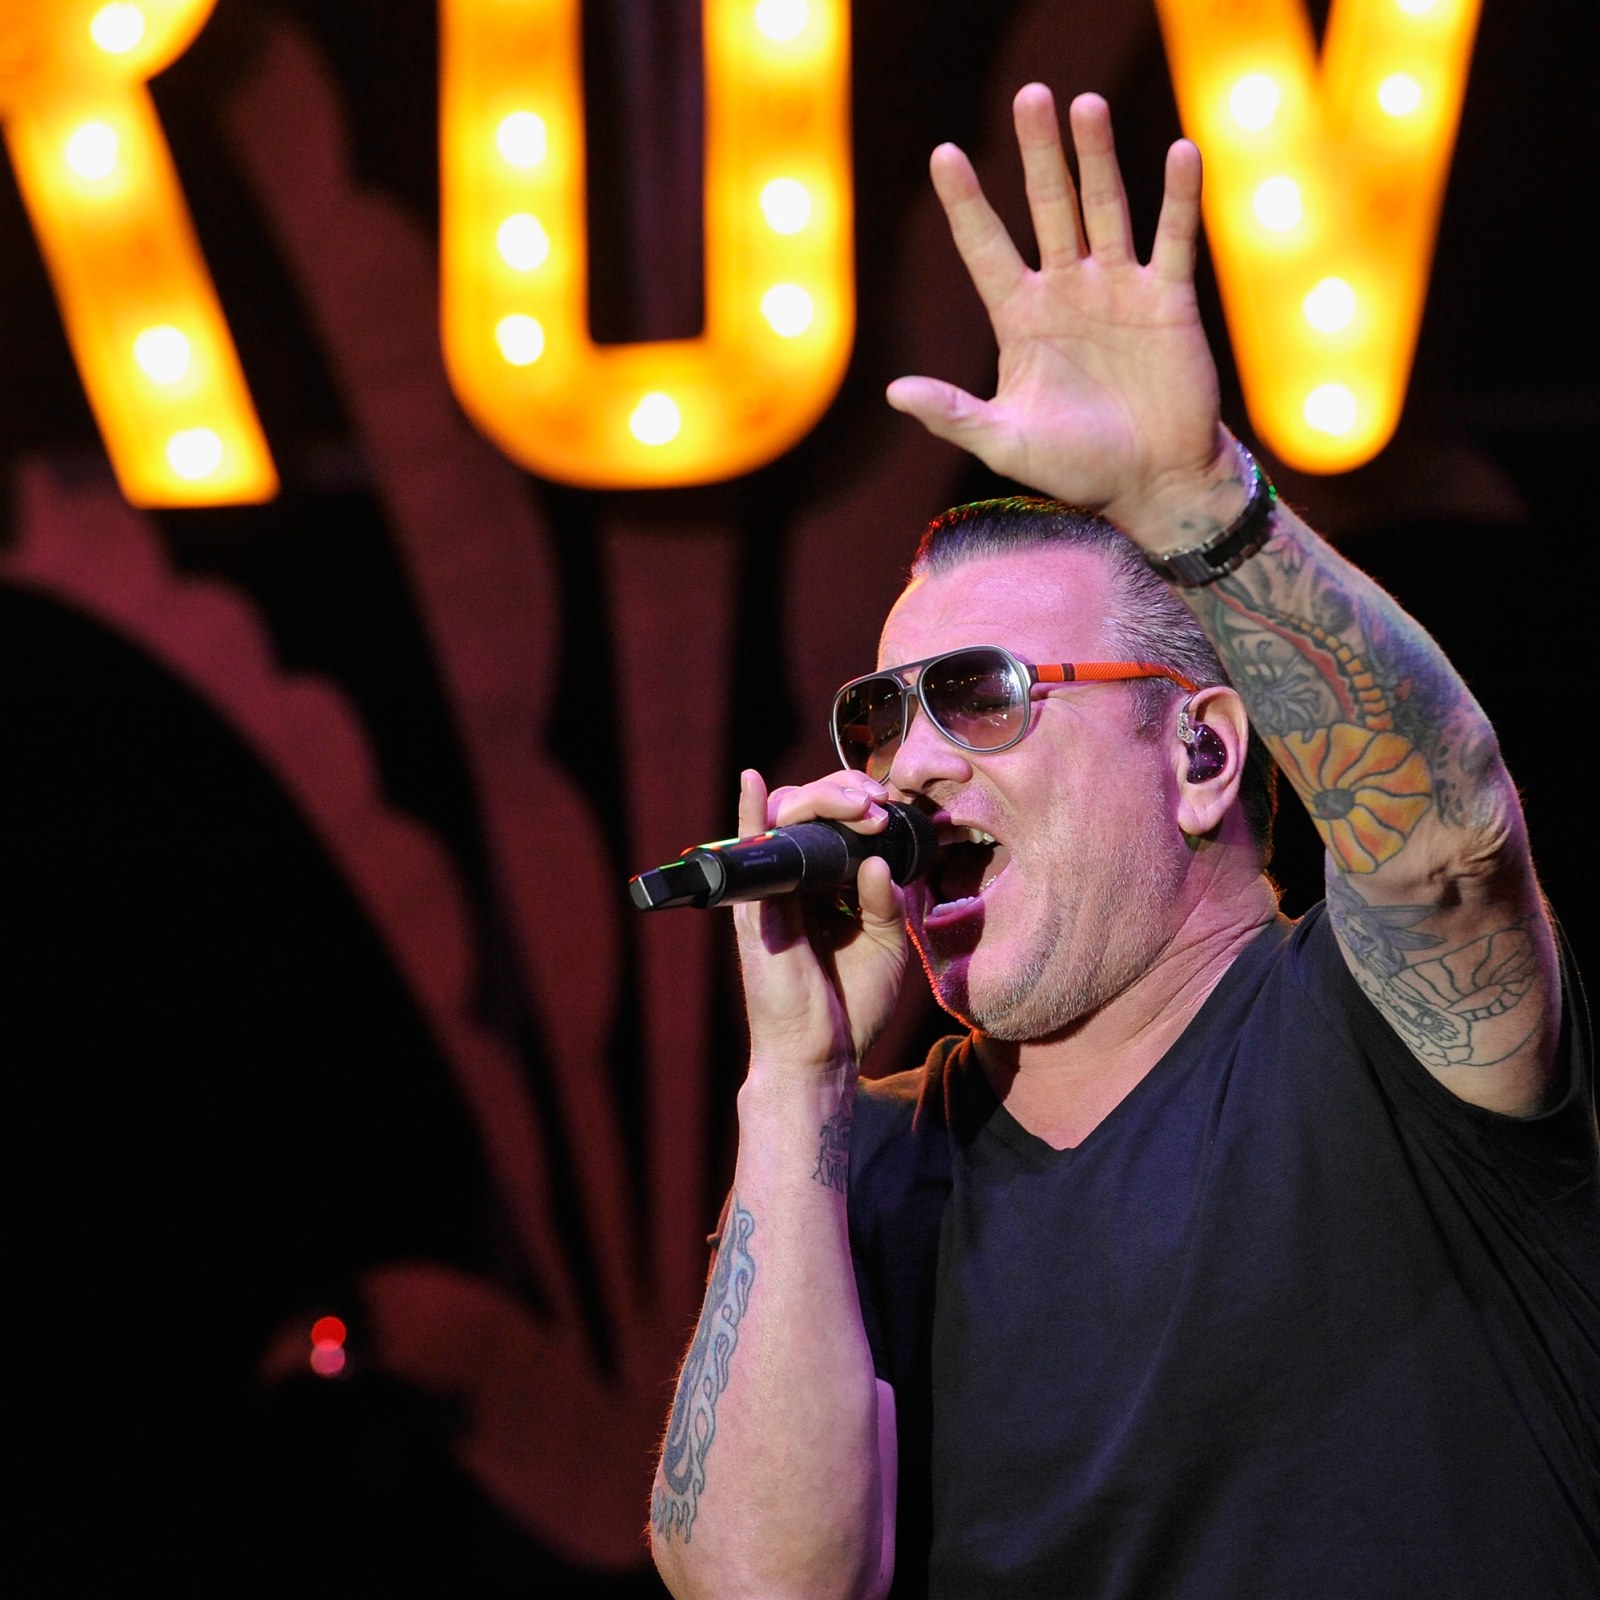 COVID Concert Isn't the First Time Smash Mouth Singer Steve Harwell Has  Courted Controversy